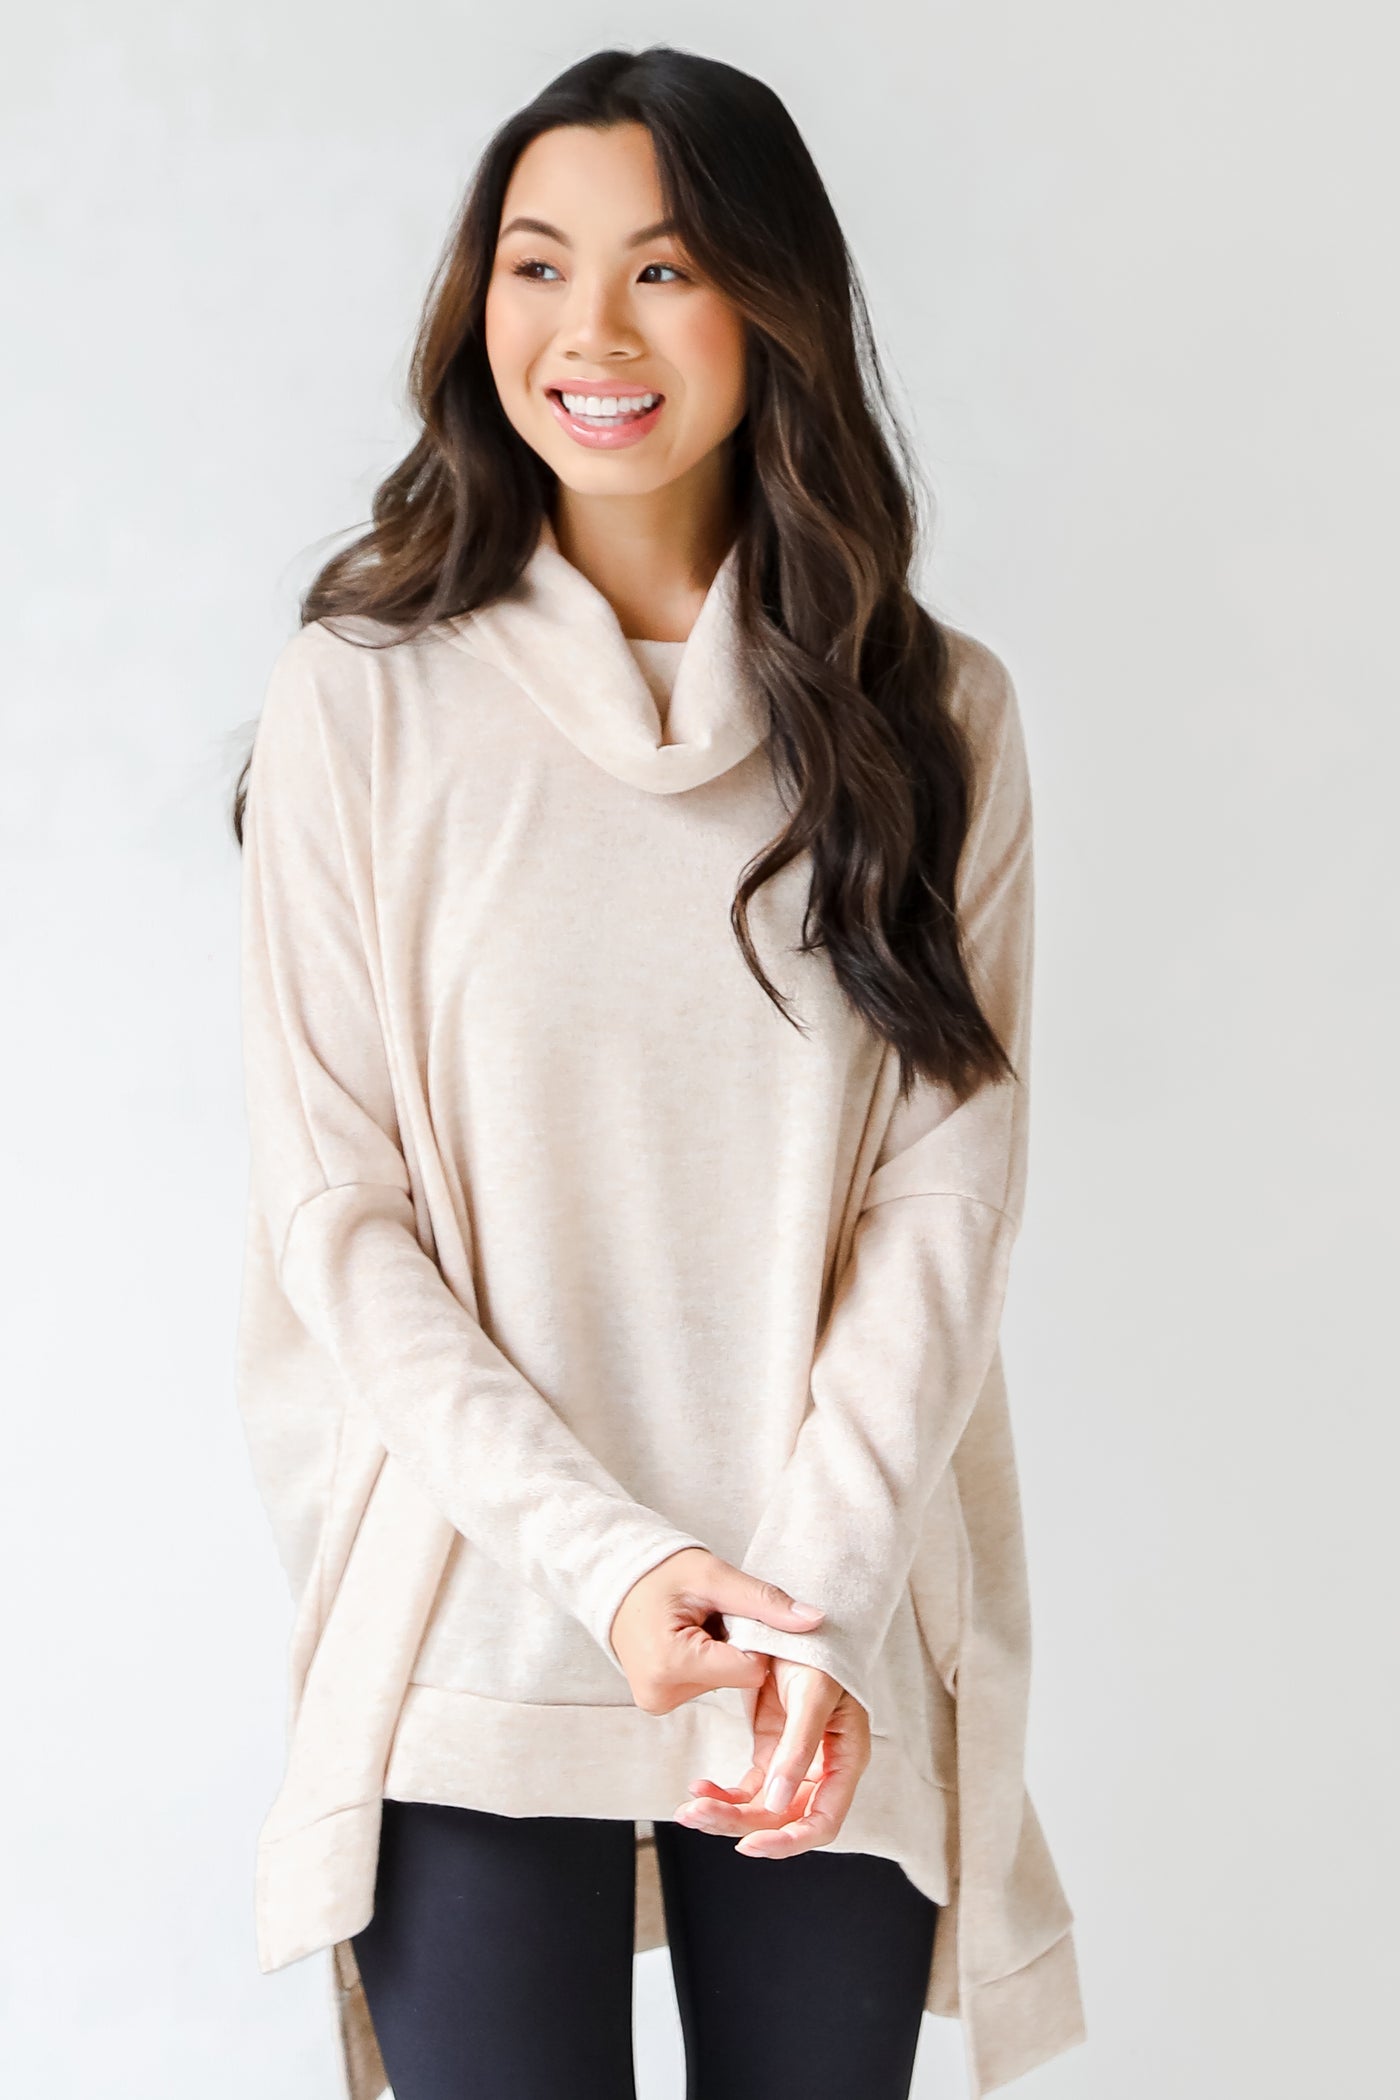 Cowl Neck Knit Top in oatmeal front view